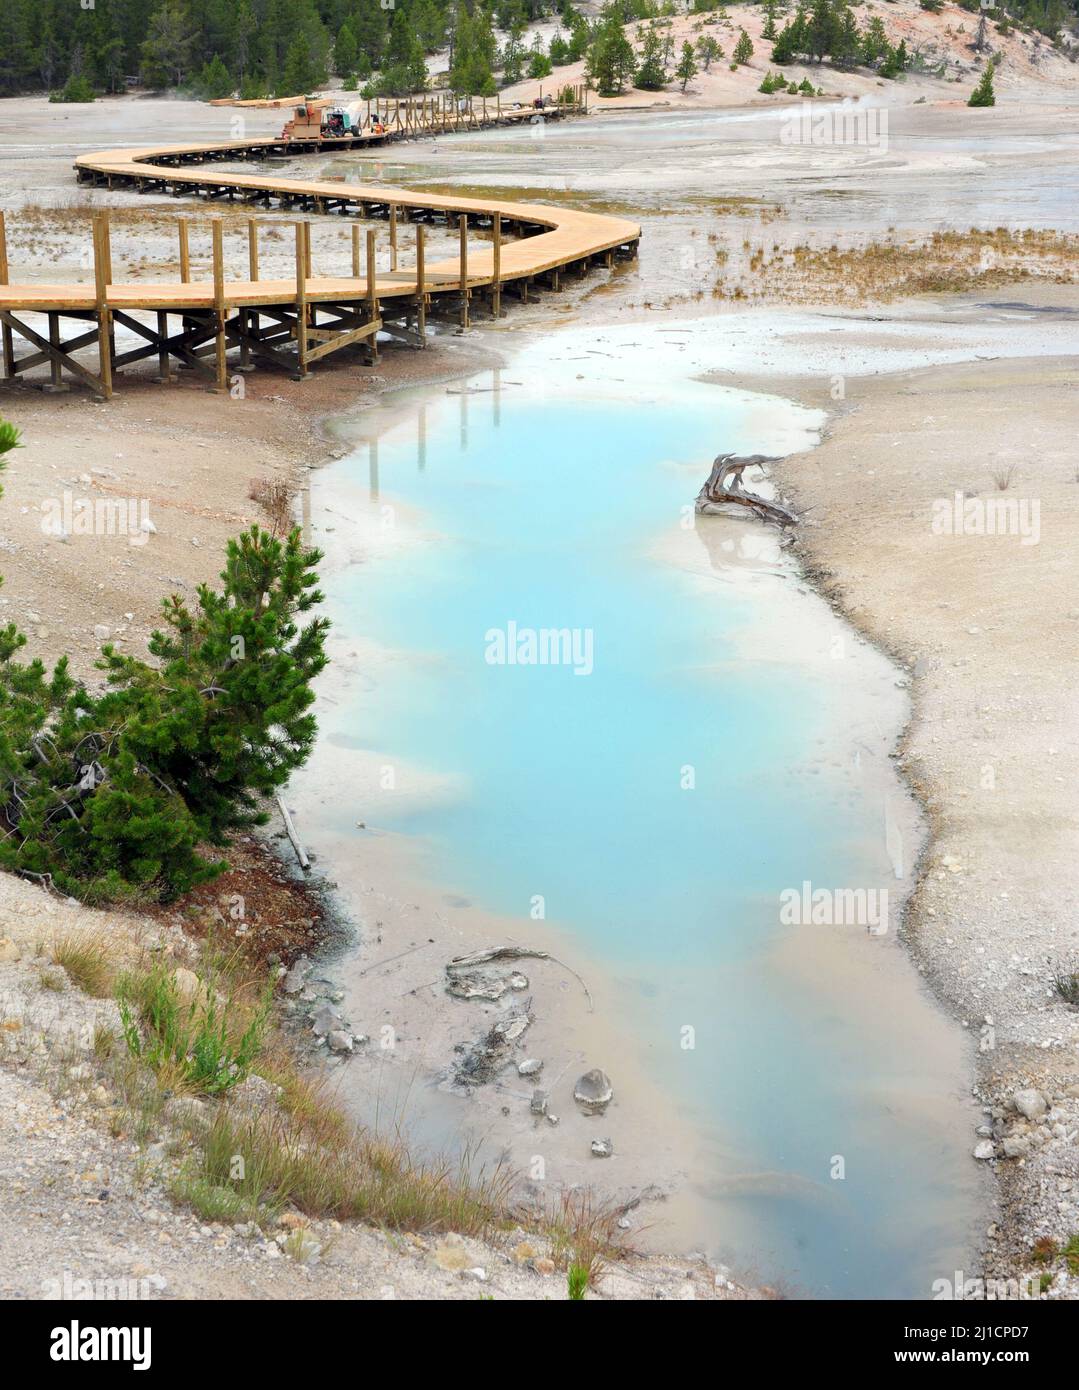 Wooden Porcelain Basin Trail runs besides Palette Springs, in the Norris Geyser Basin, in Yellowstone National Park is under construction or repairs. Stock Photo